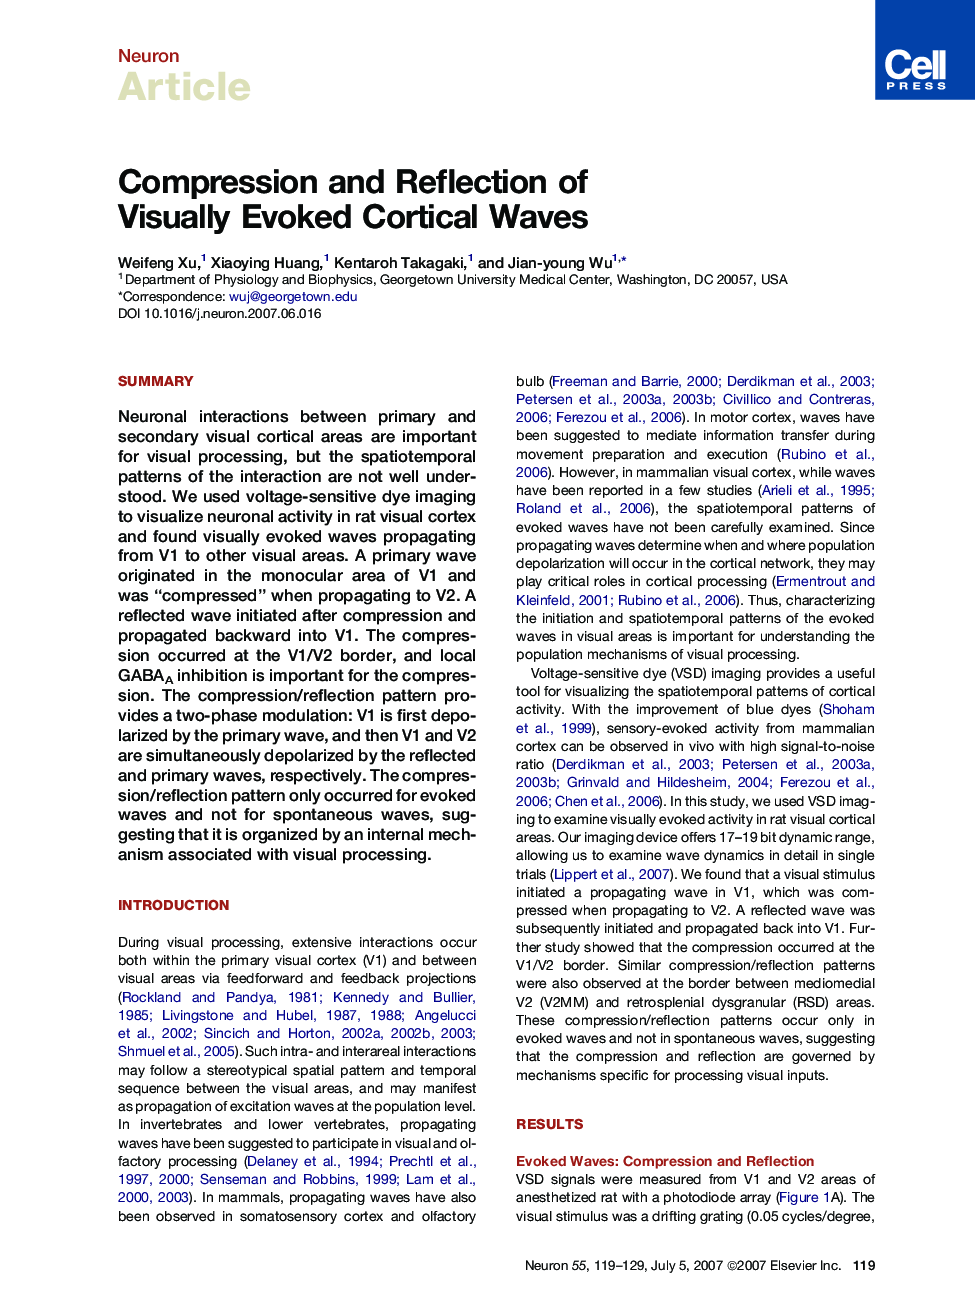 Compression and Reflection of Visually Evoked Cortical Waves